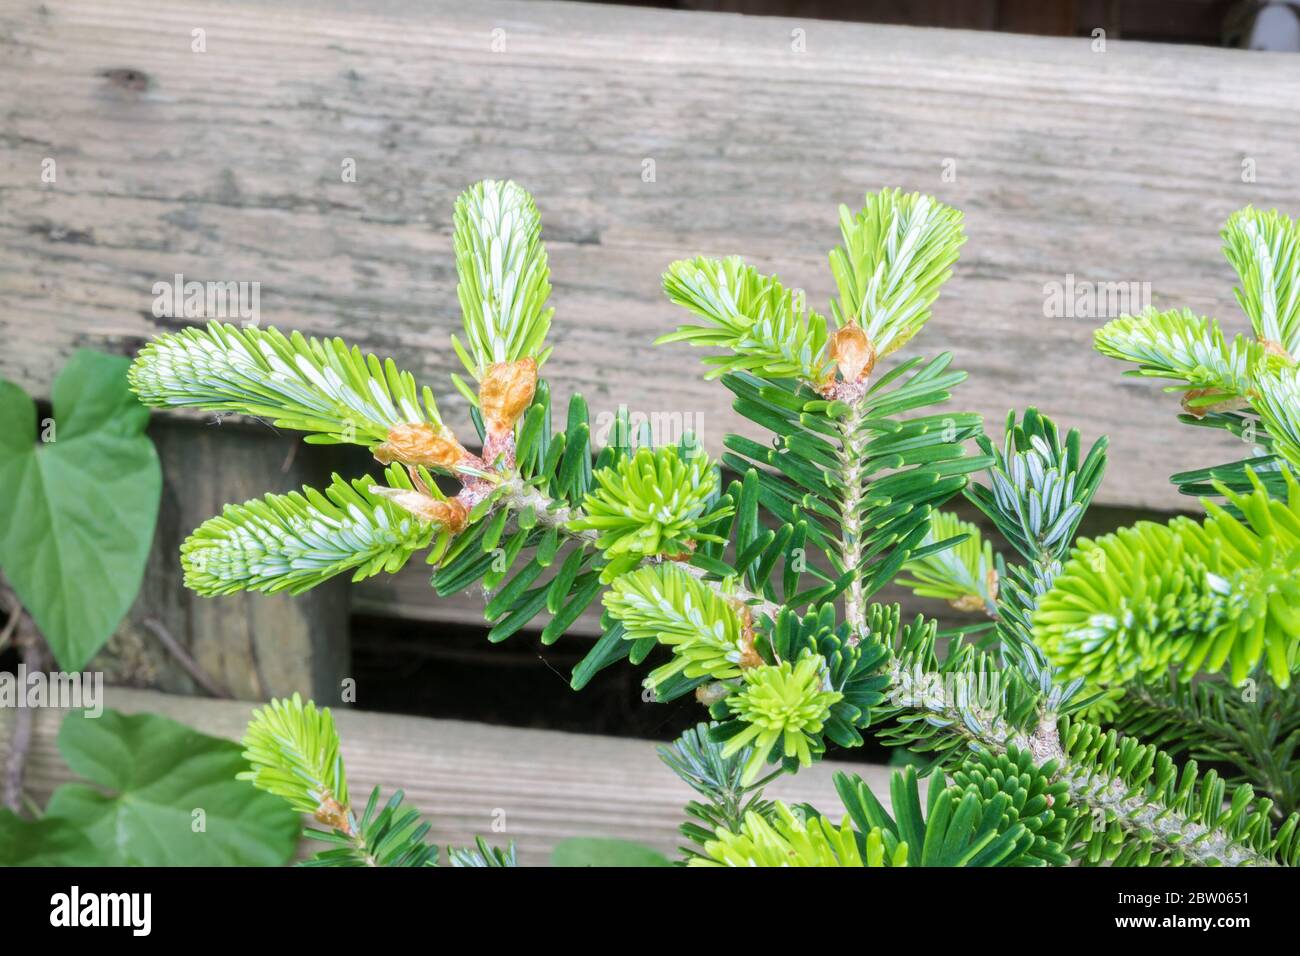 Young shoots of Korean fir (Abies koreana) during springtime. Beautiful soft silvery green colored needles. Stock Photo